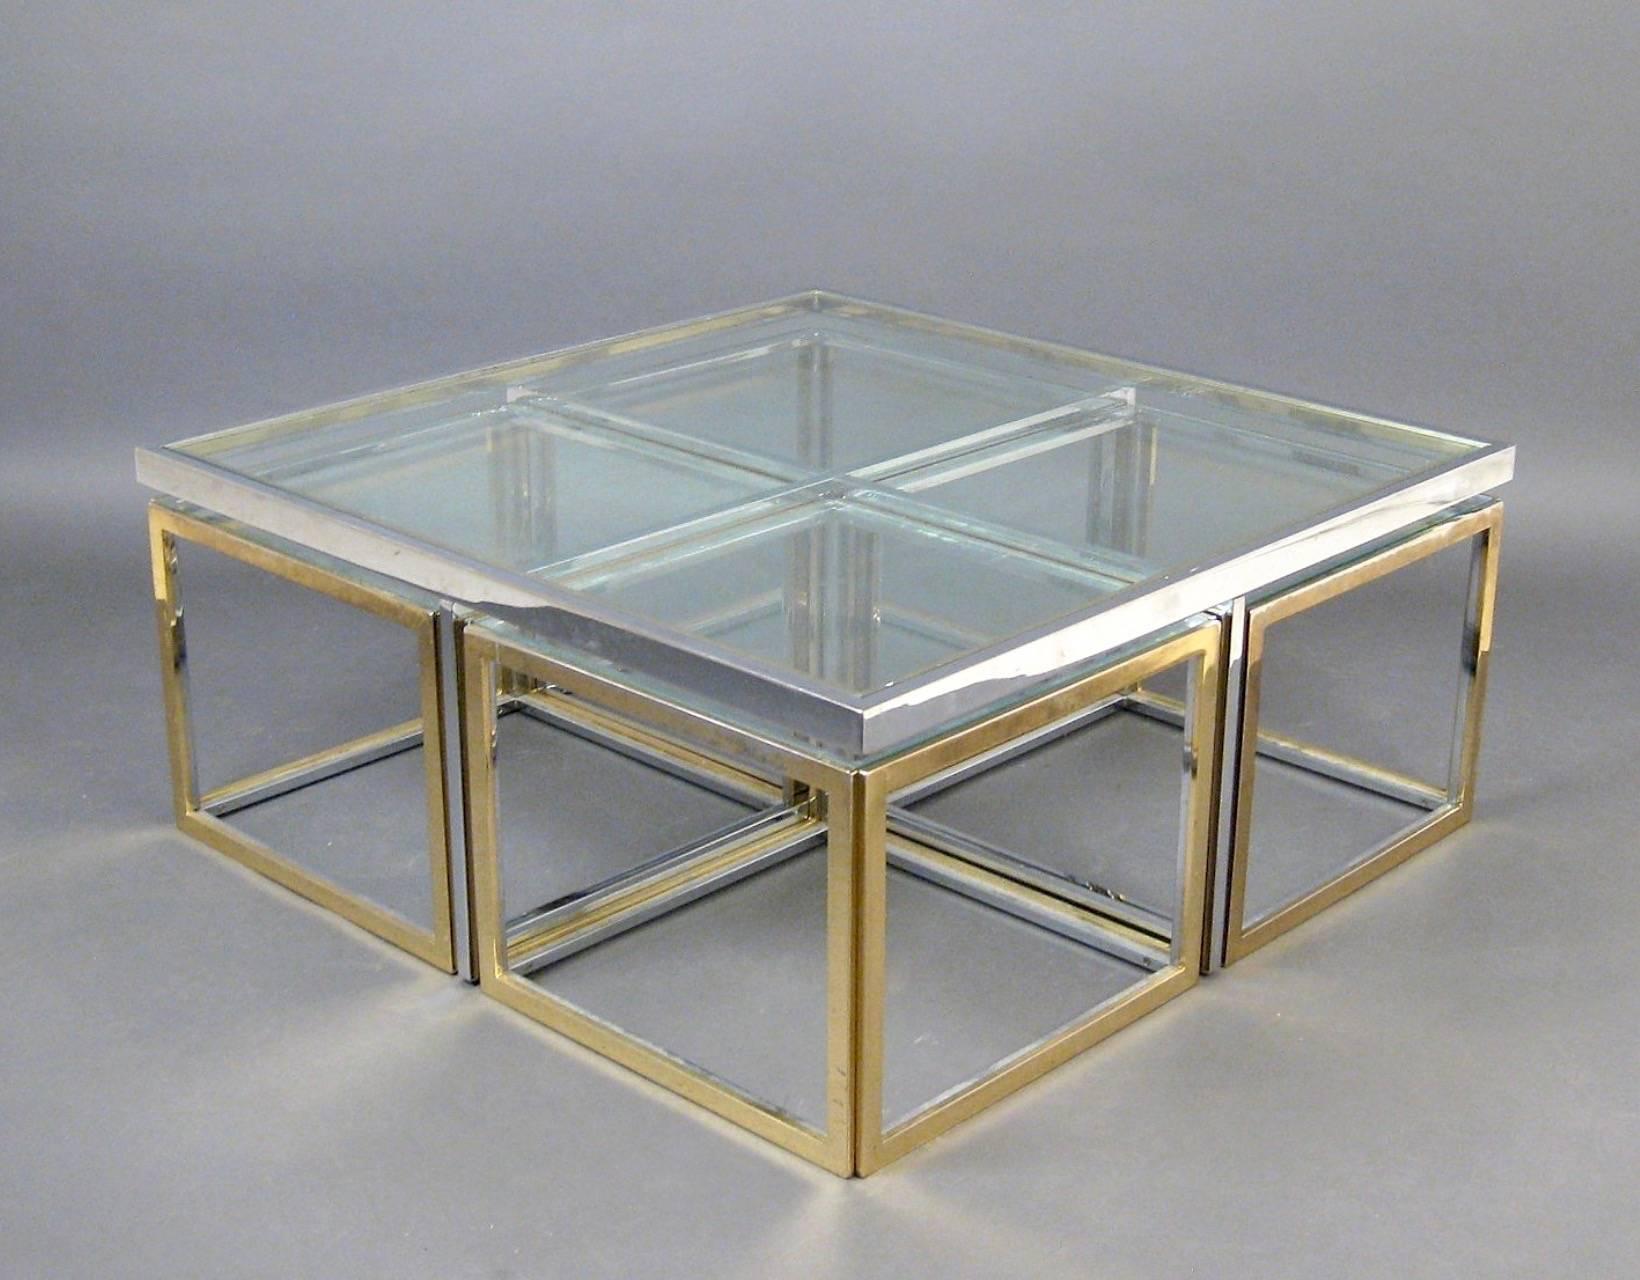 Large coffee table with four small movable tables. Construction of polished chrome and gold-colored metal, loose inset clear glass plate. Attributed to Maison Charles.
The table has been recently restored and re-polished, only minor fading and tiny